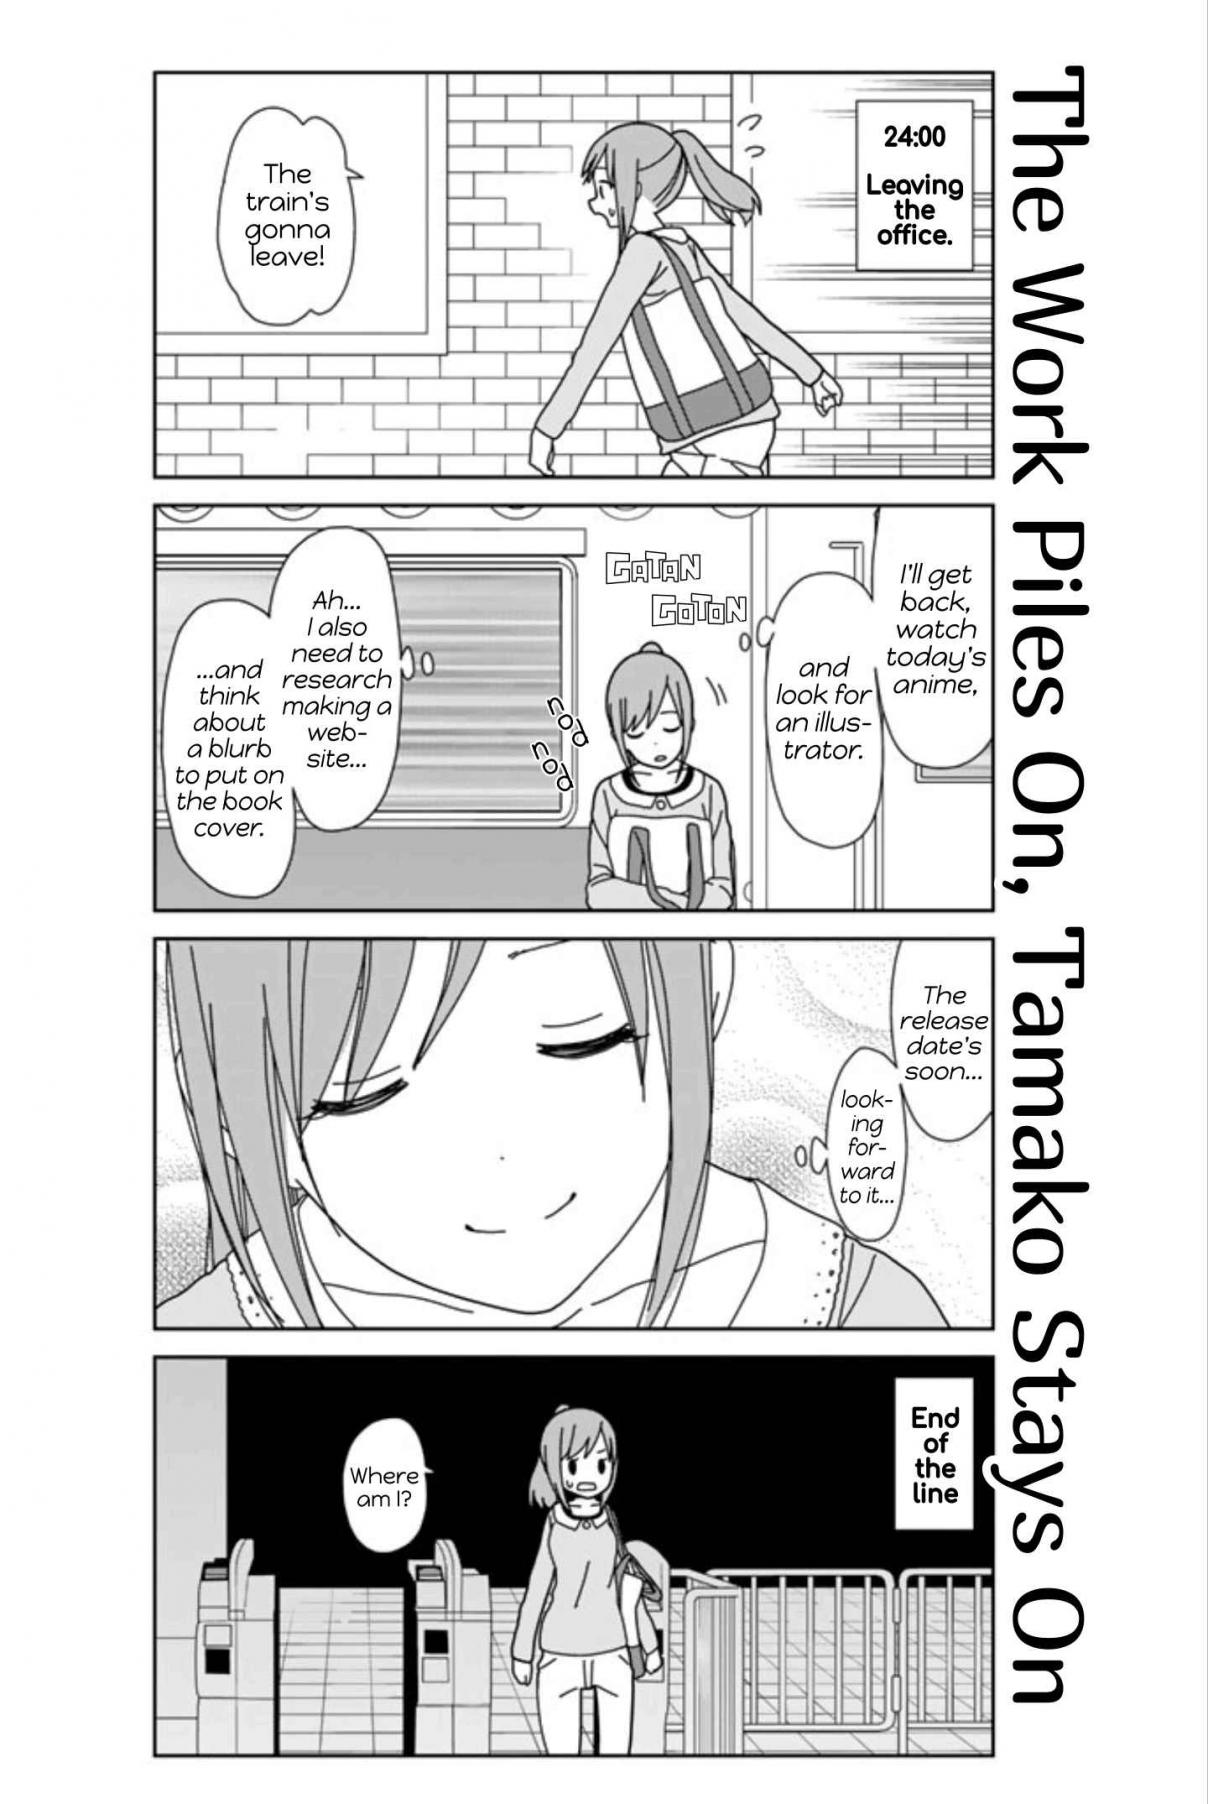 Kin no Tamago Vol. 2 Ch. 18 A Day in the Life of Tamako